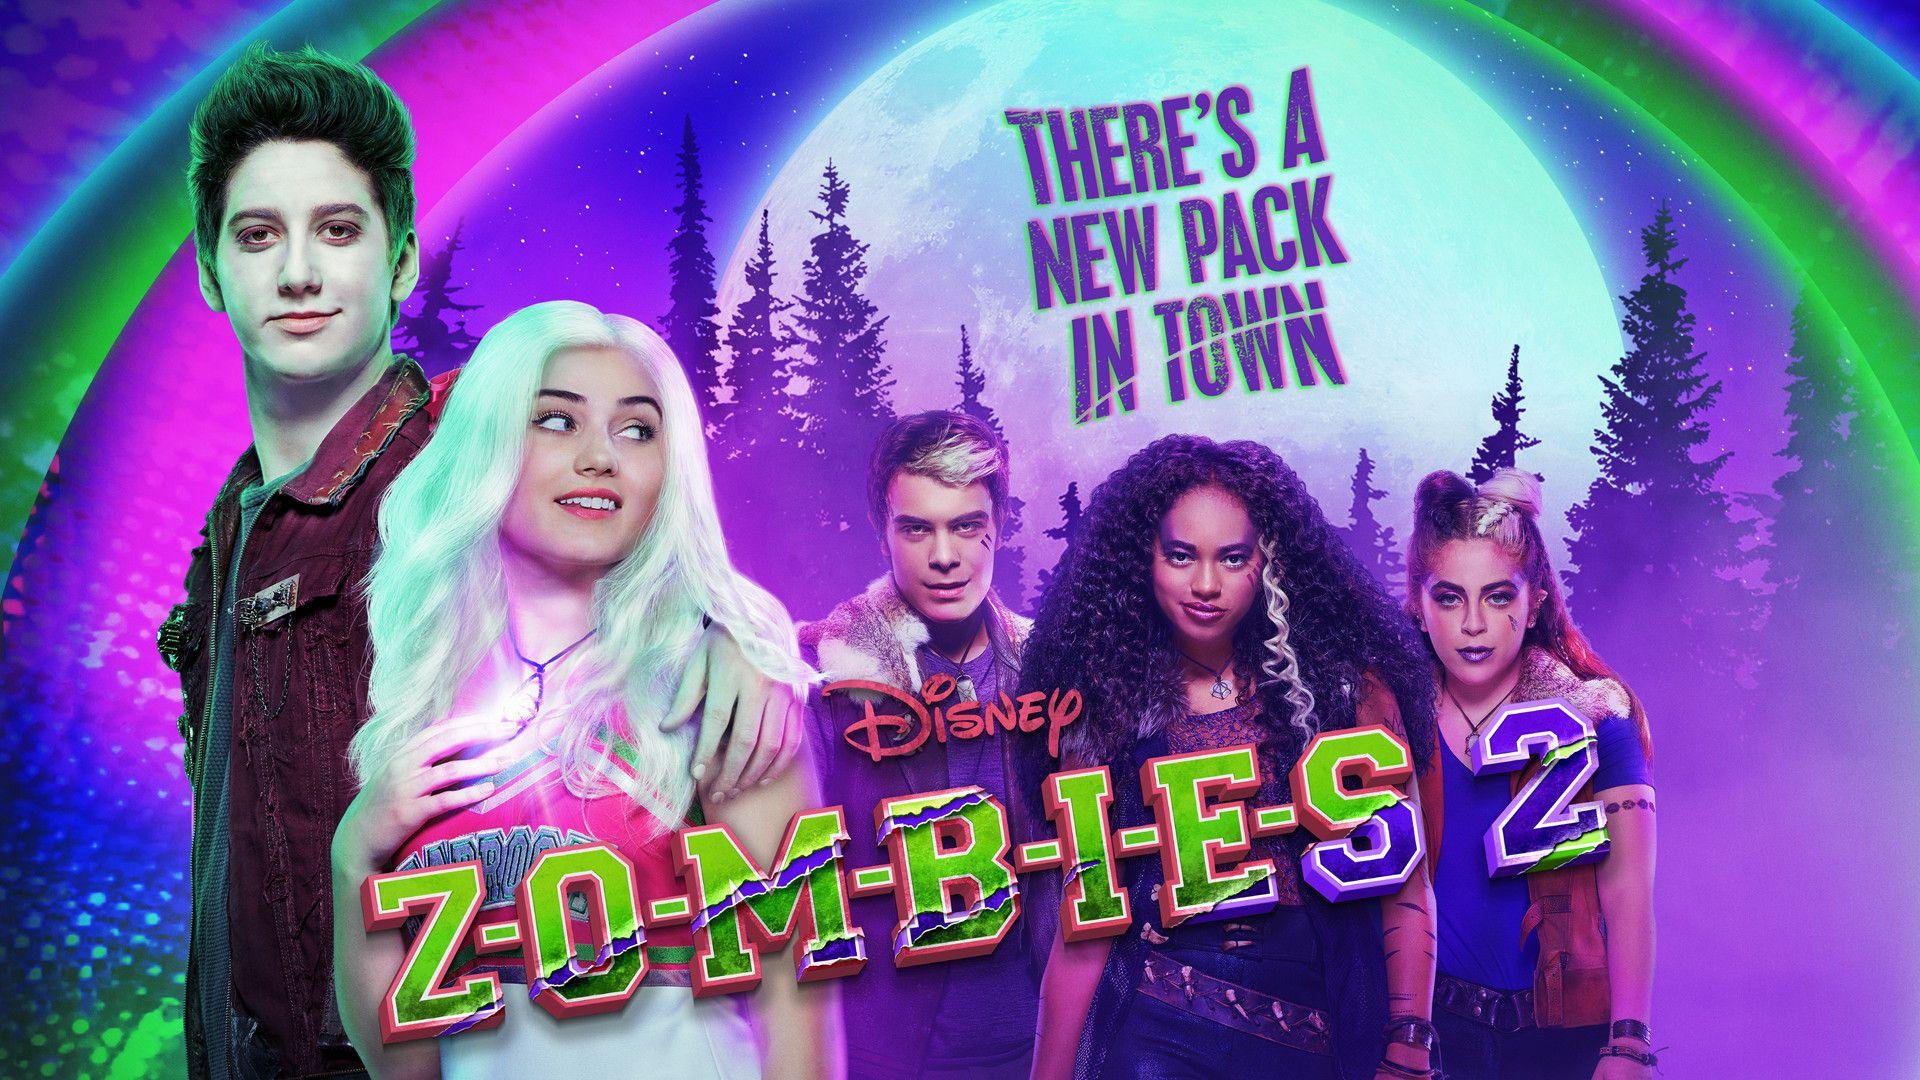 Zombies 2 Disney Wallpapers - Top Free Zombies 2 Disney Backgrounds ...